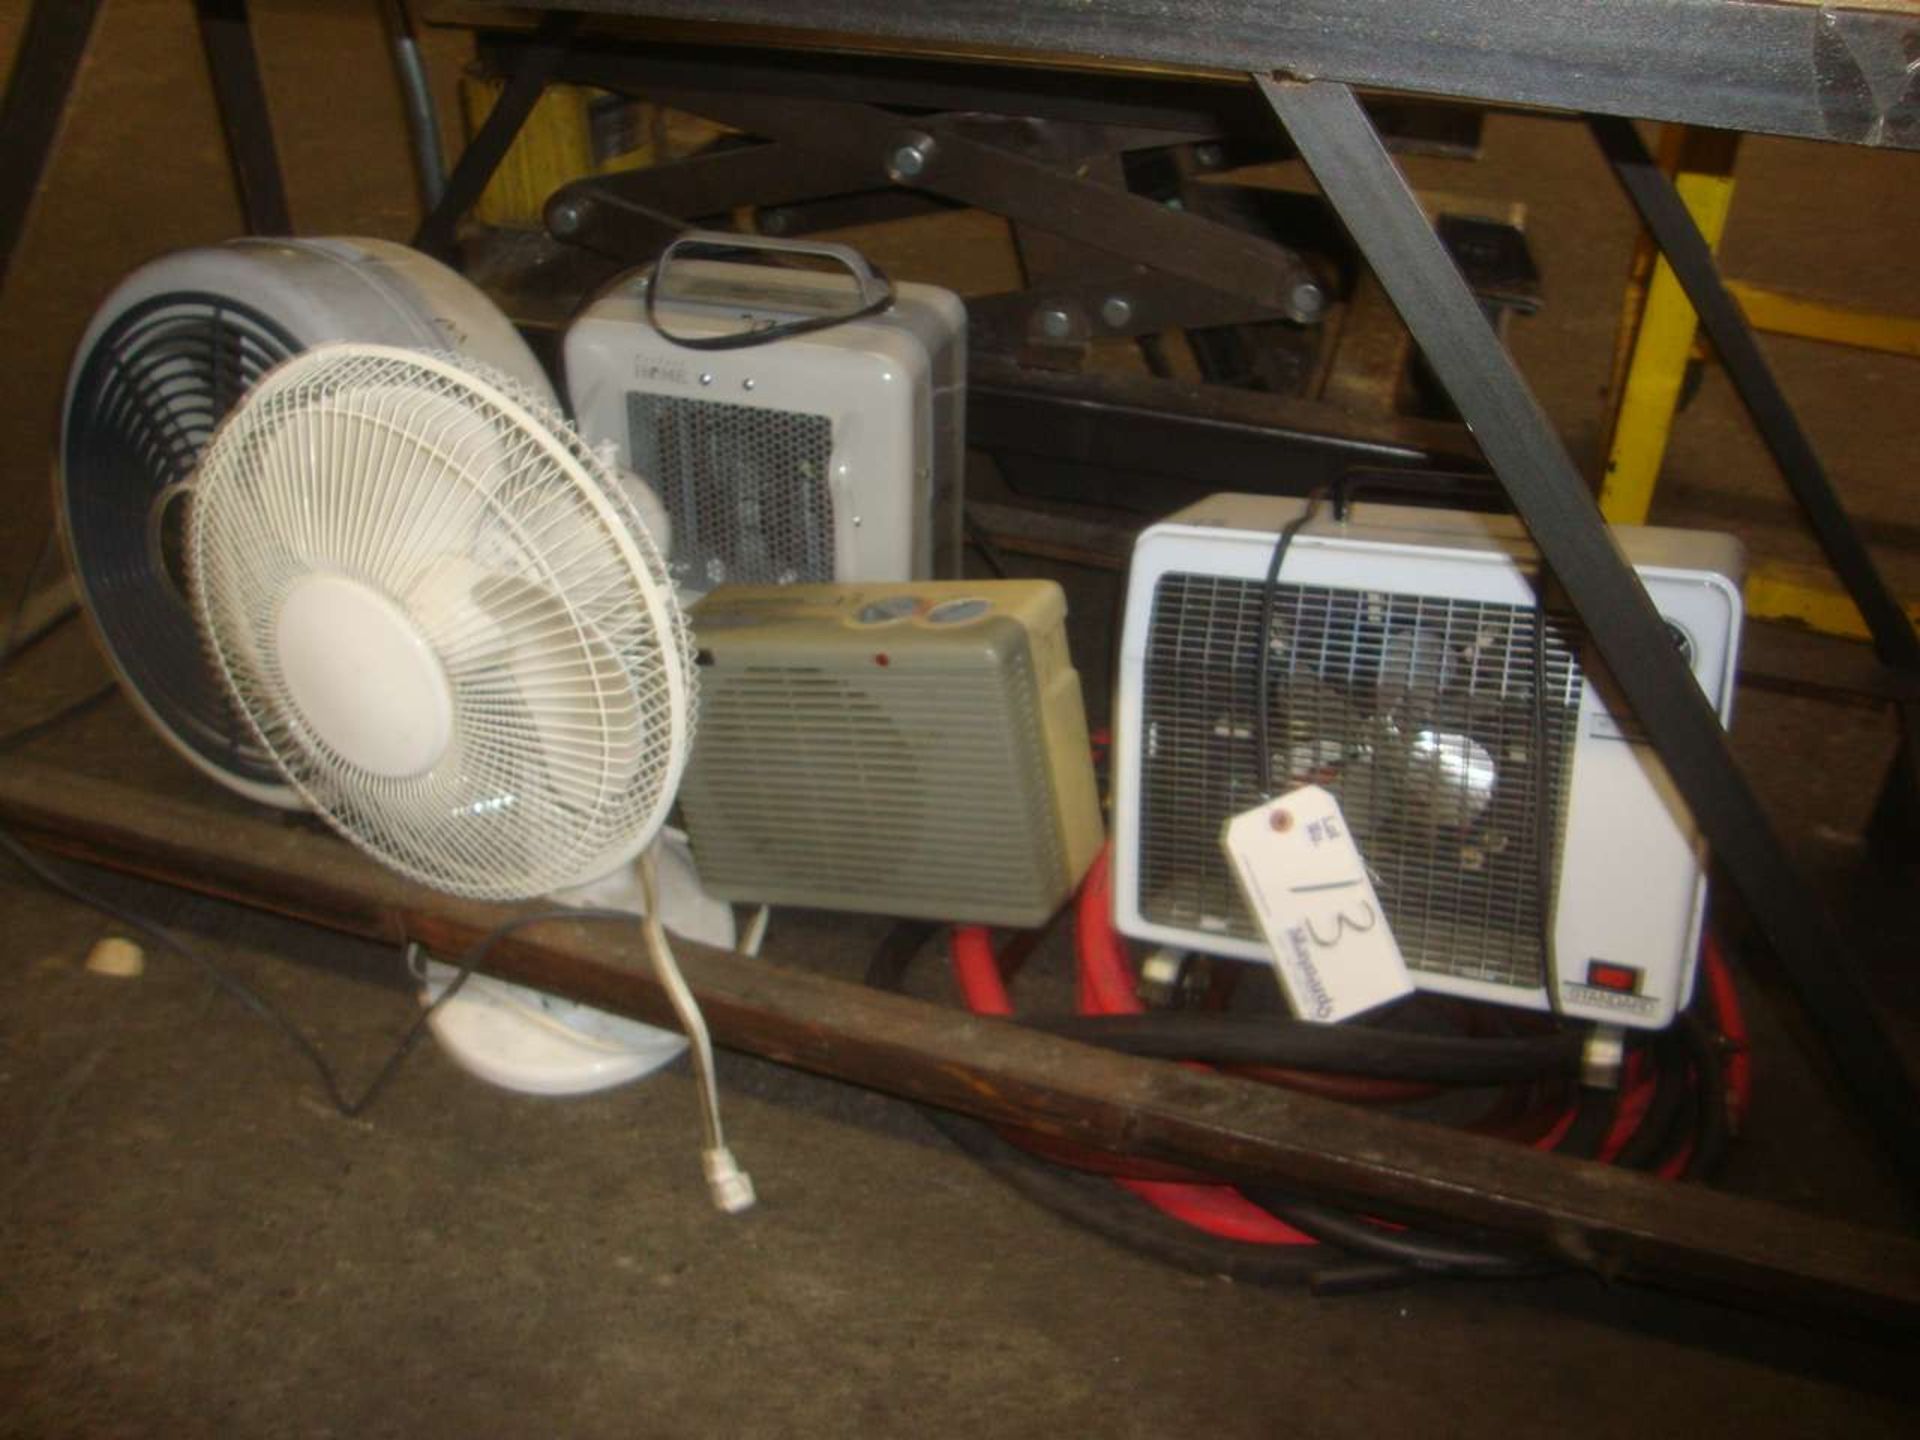 Heaters and fans